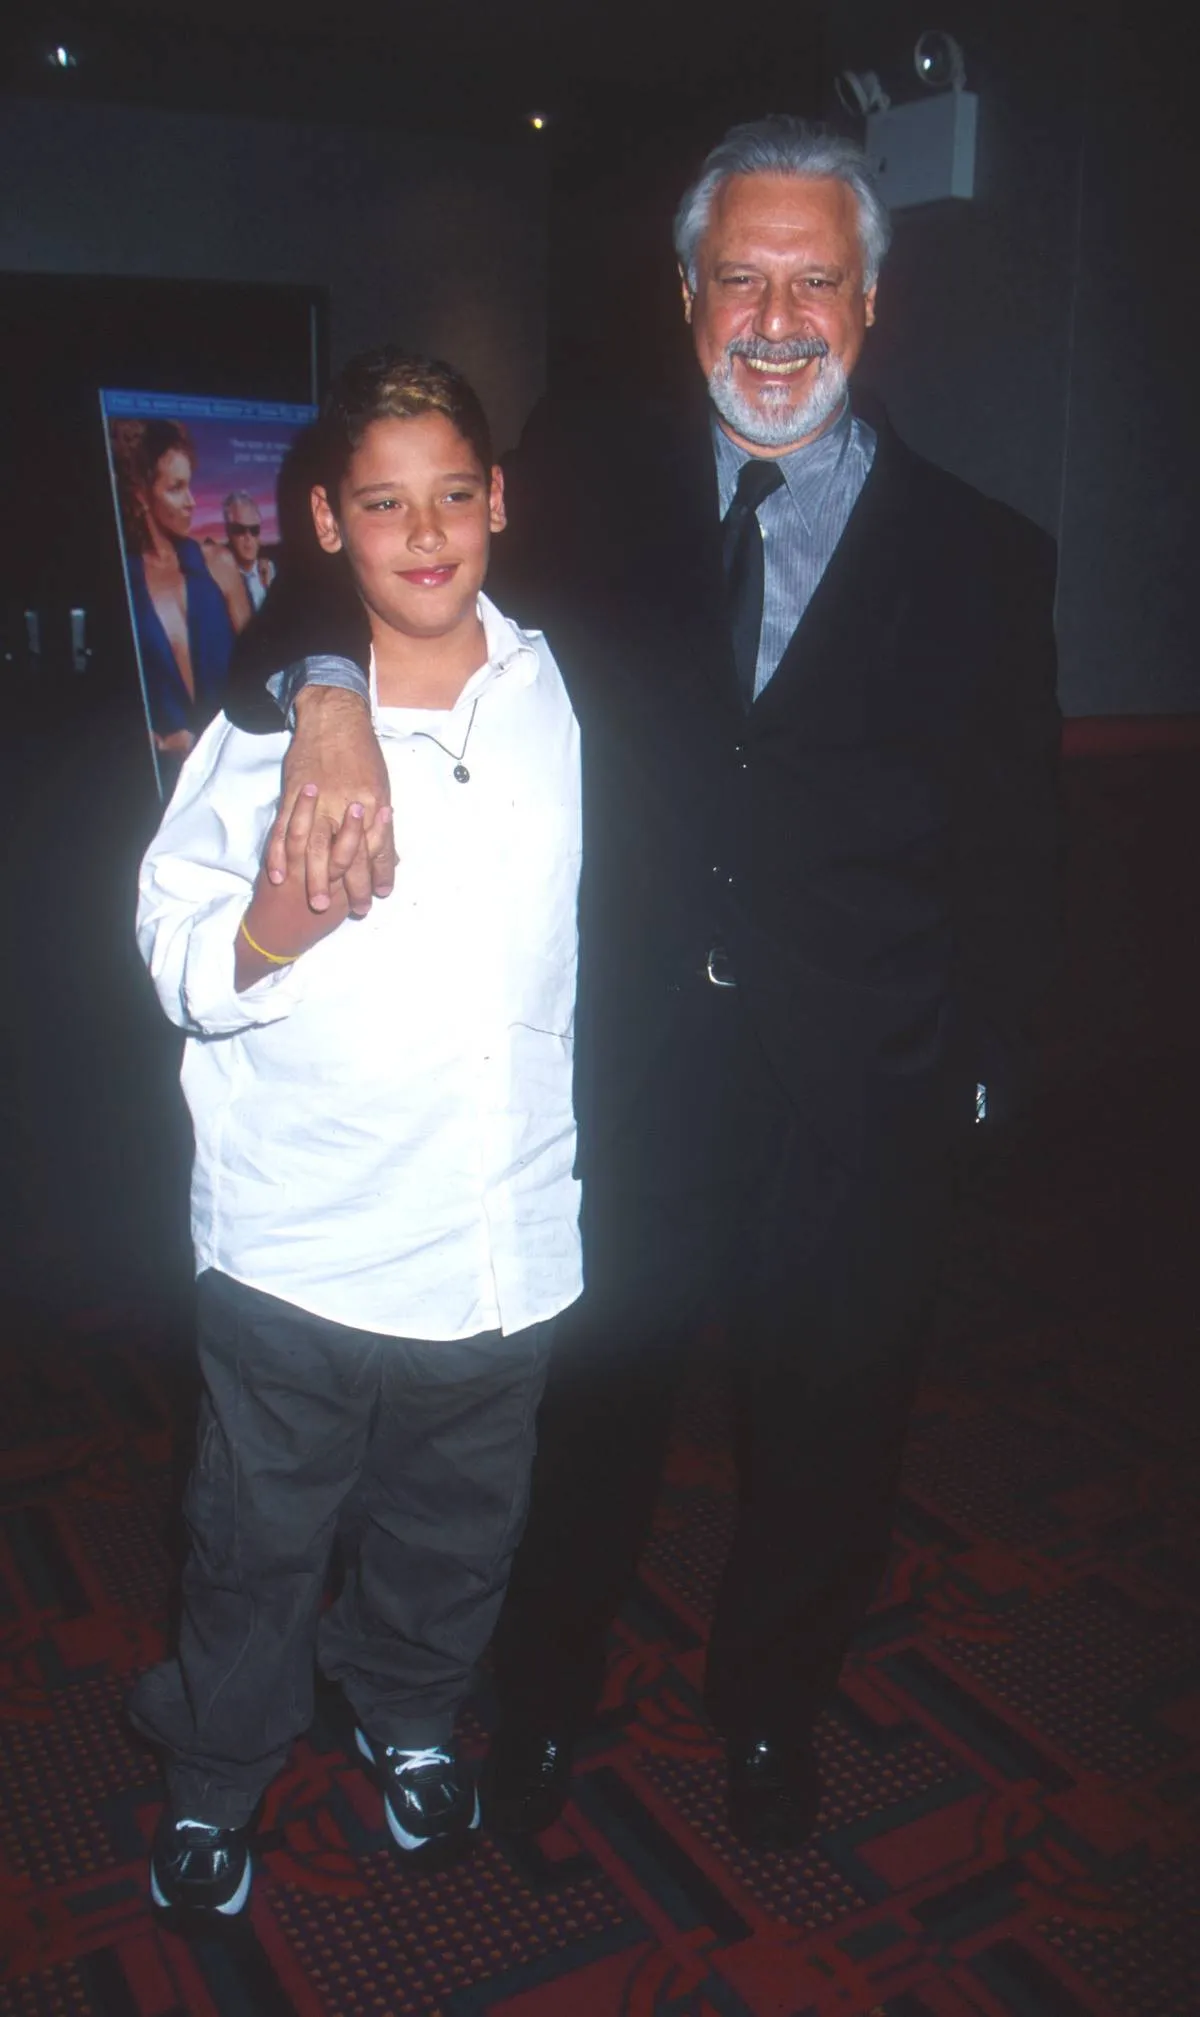 Actor Antonio Fagundes with his son attend the New York premiere of 